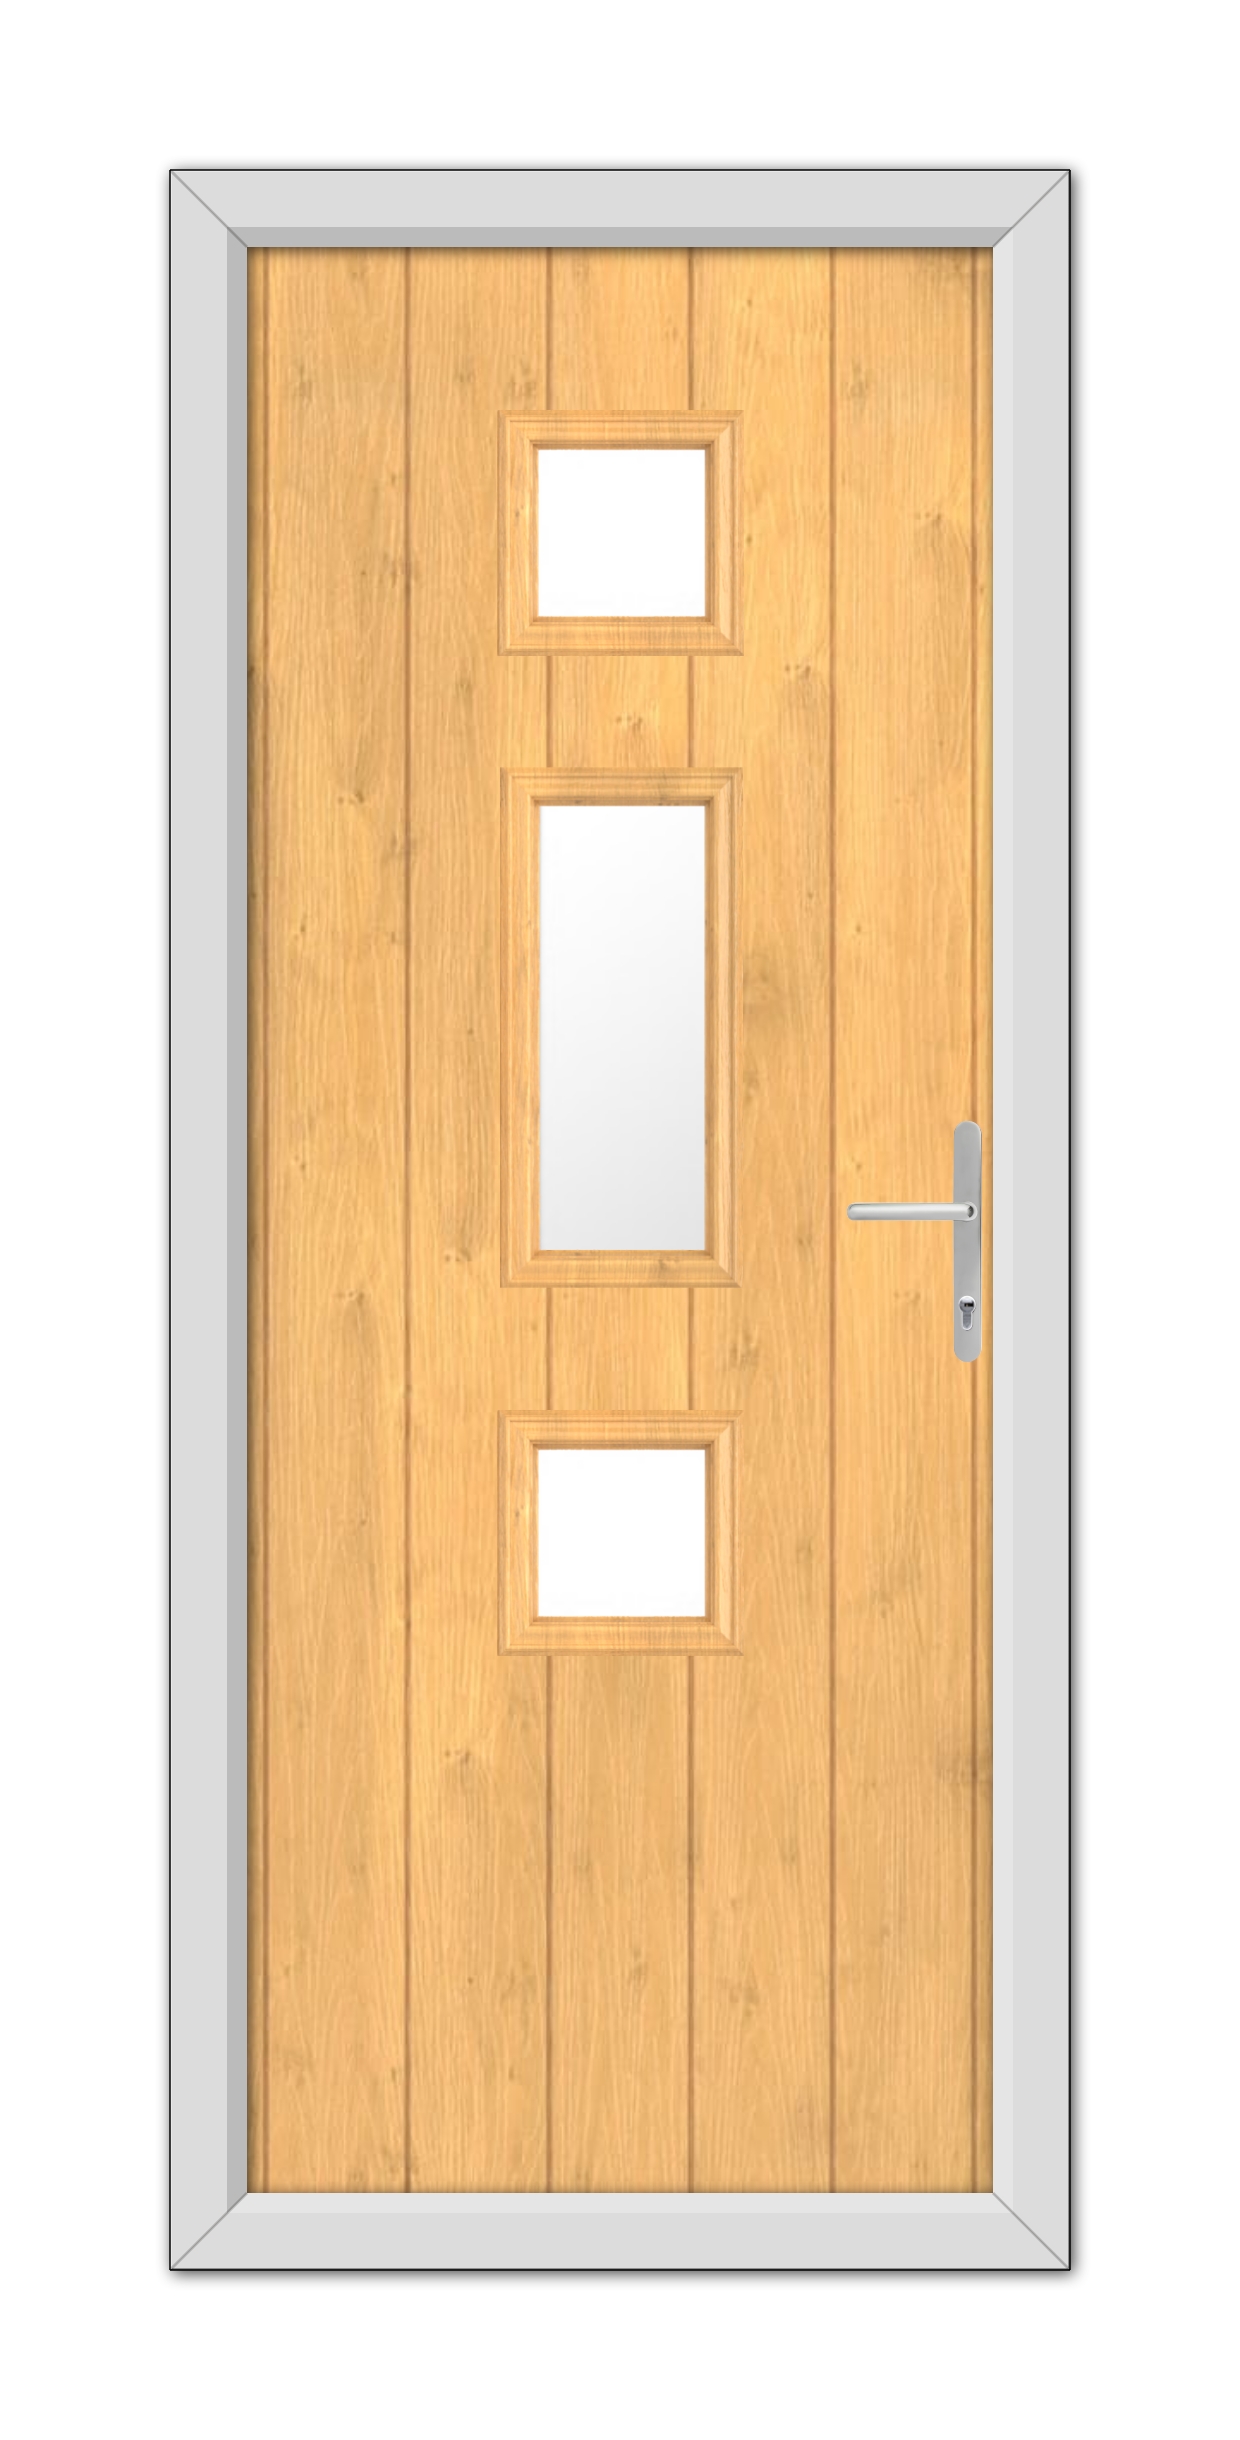 A modern Irish Oak York Composite Door with three rectangular glass panels, set within a gray frame, featuring a silver handle on the right side.